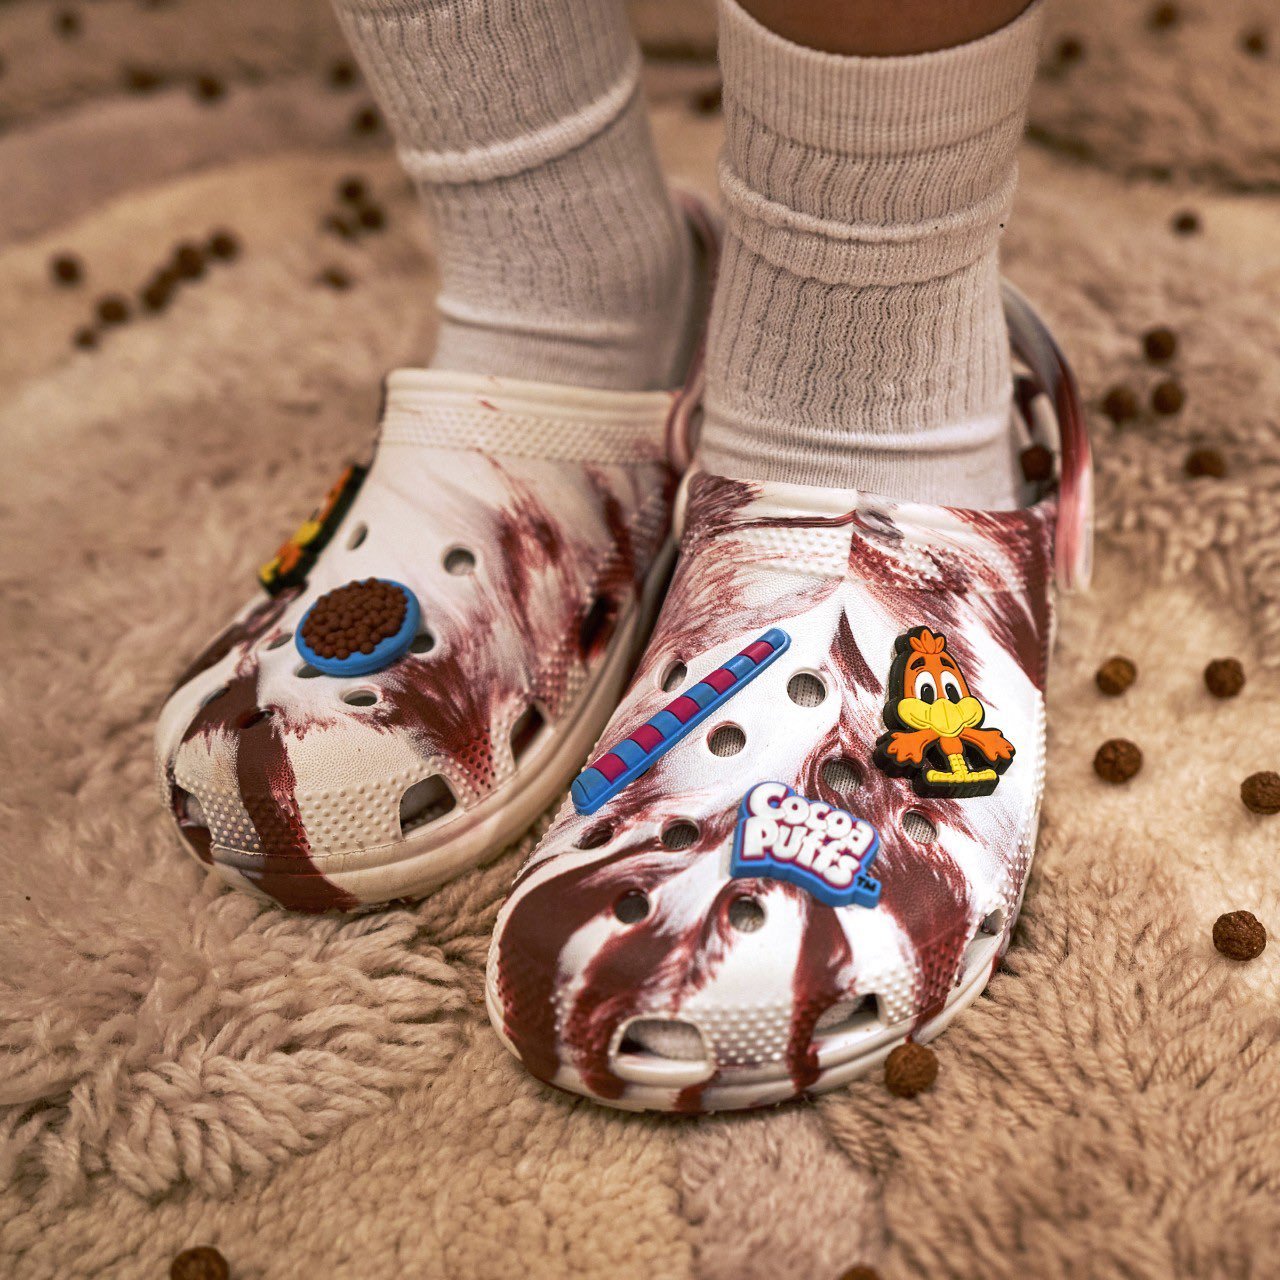 højttaler damper Harden Now Available: Cocoa Puffs x Crocs Classic Clog — Sneaker Shouts